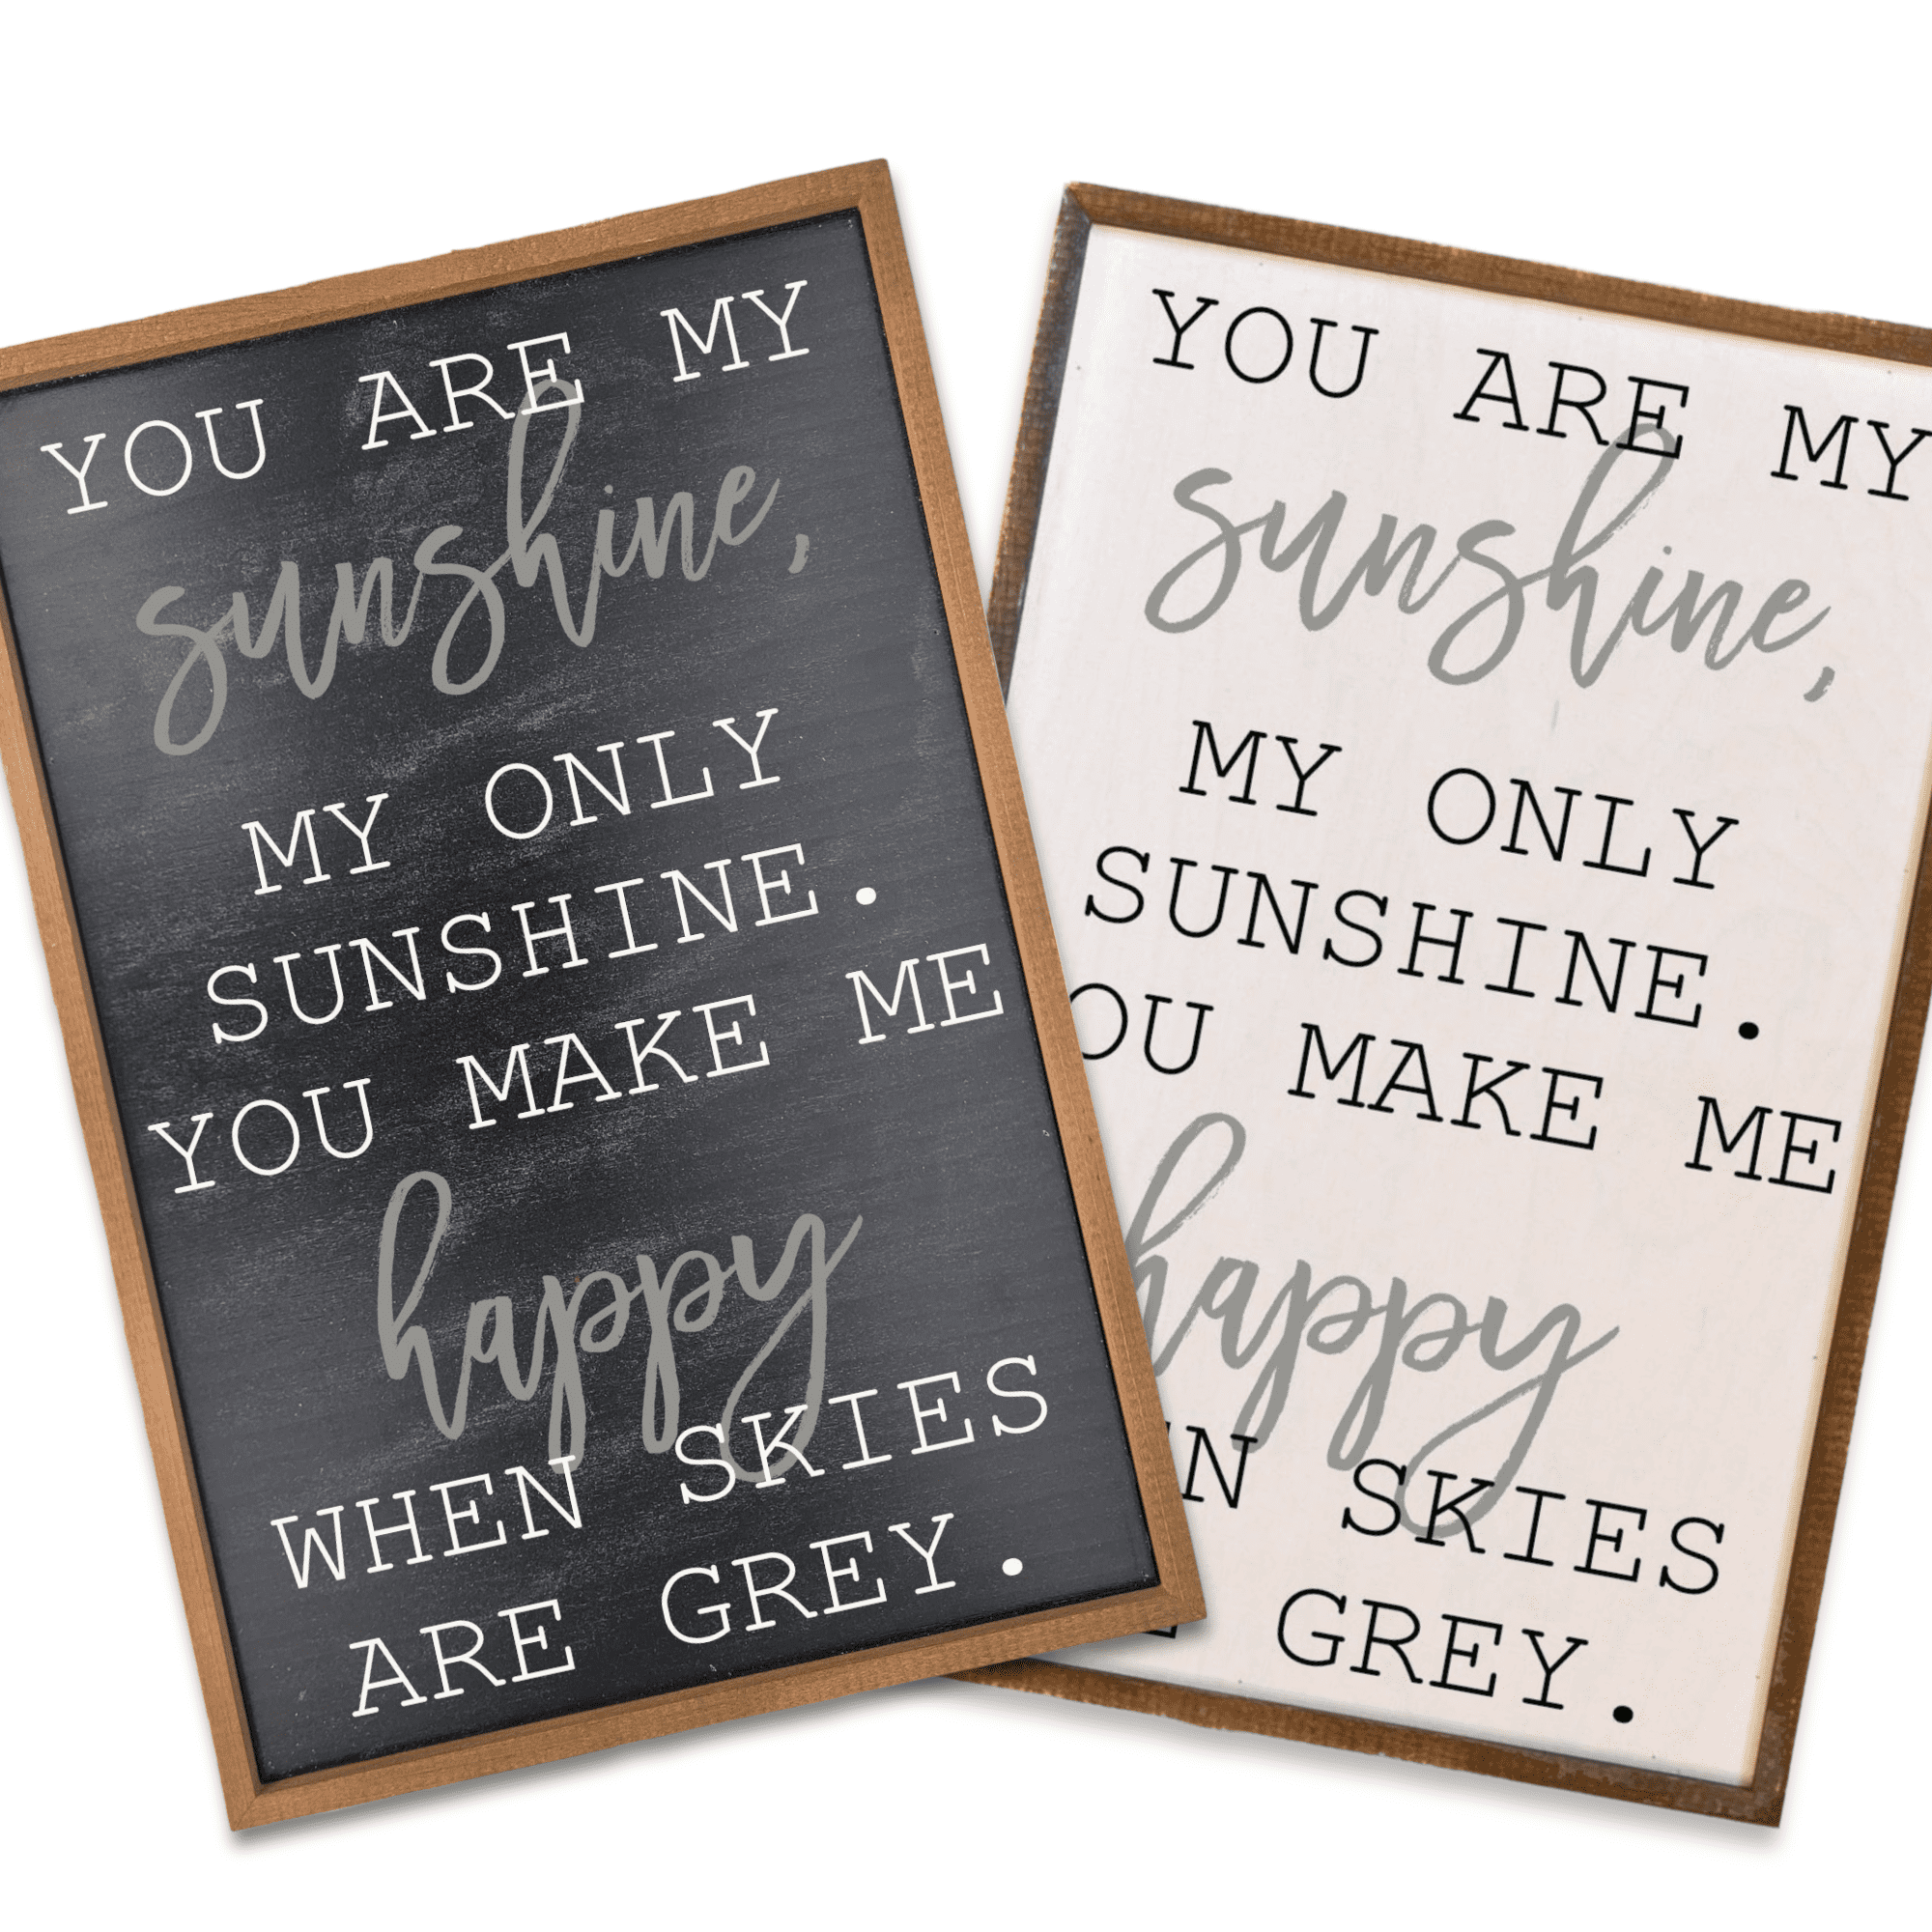 12x18 You Are My Sunshine Wood Sign - Two Colors - Ranch Junkie Mercantile LLC